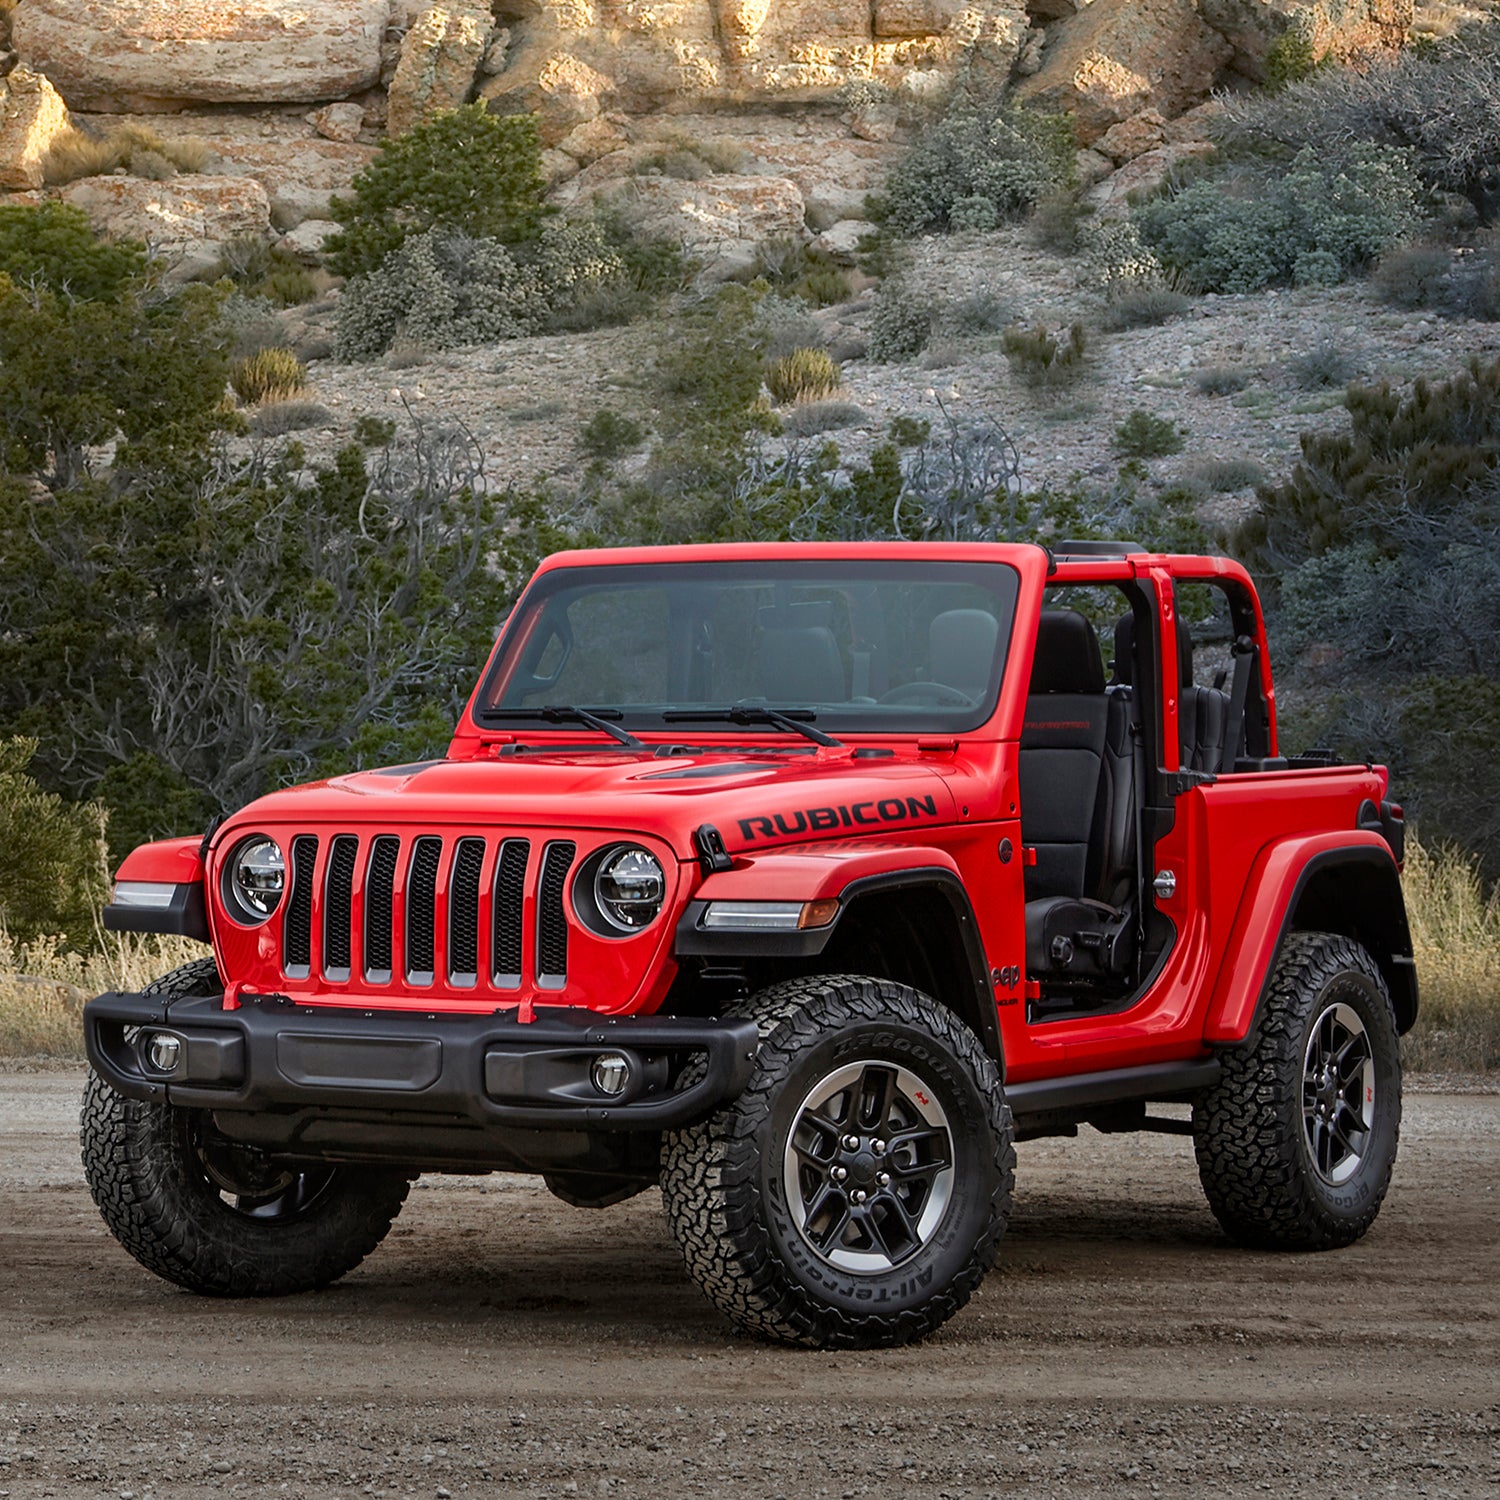 alondra humor petróleo Jeep Just Made the Wrangler Even Better - Outside Online